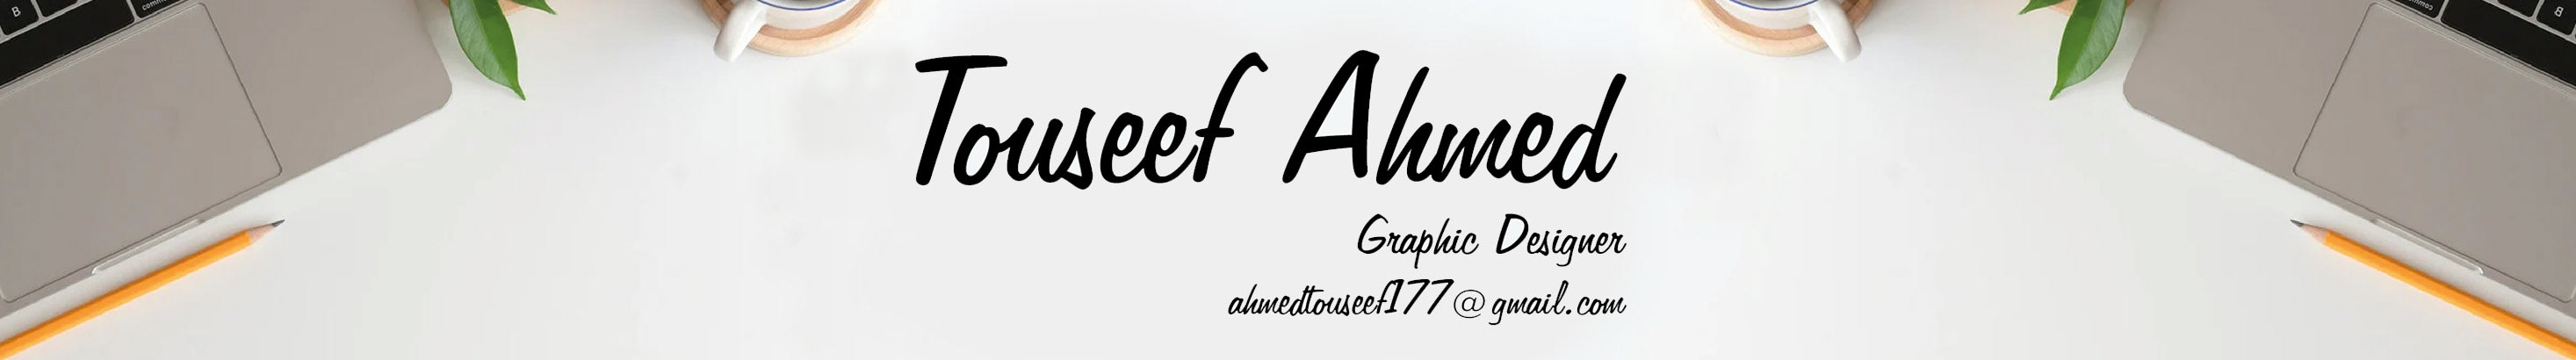 Touseef Ahmeds profilbanner